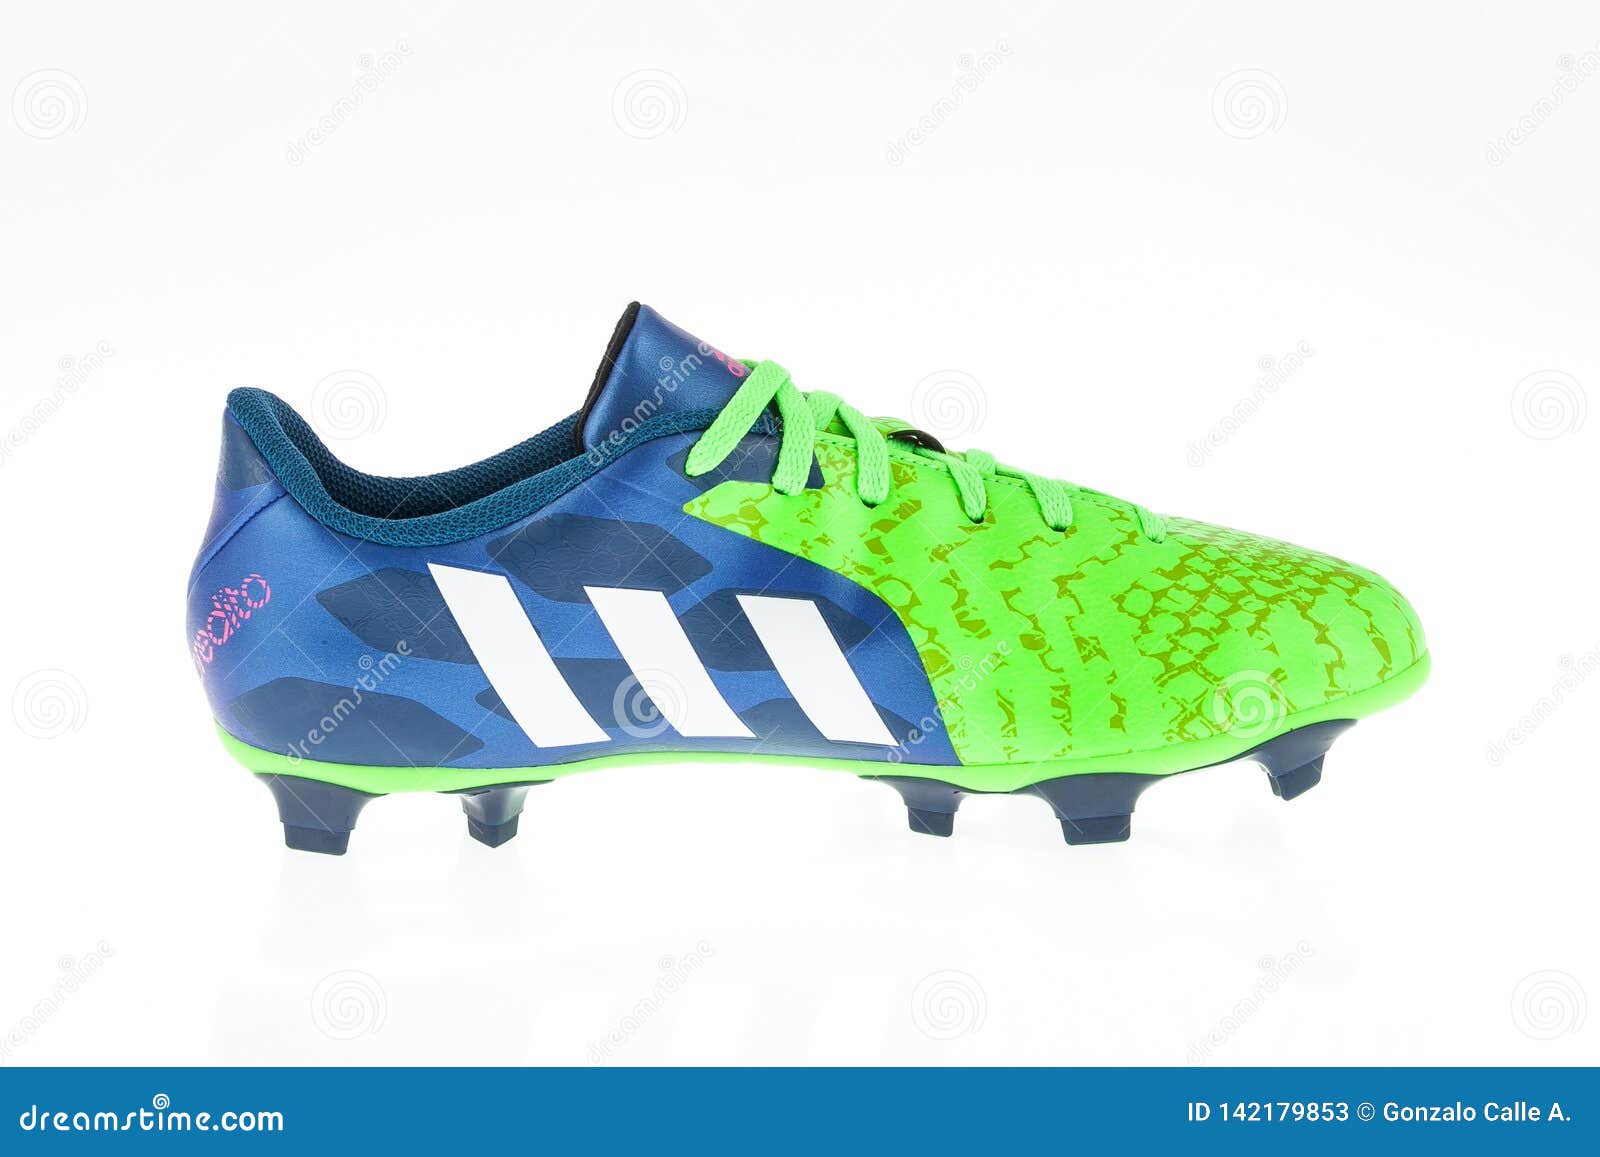 adidas soccer cleats 2019